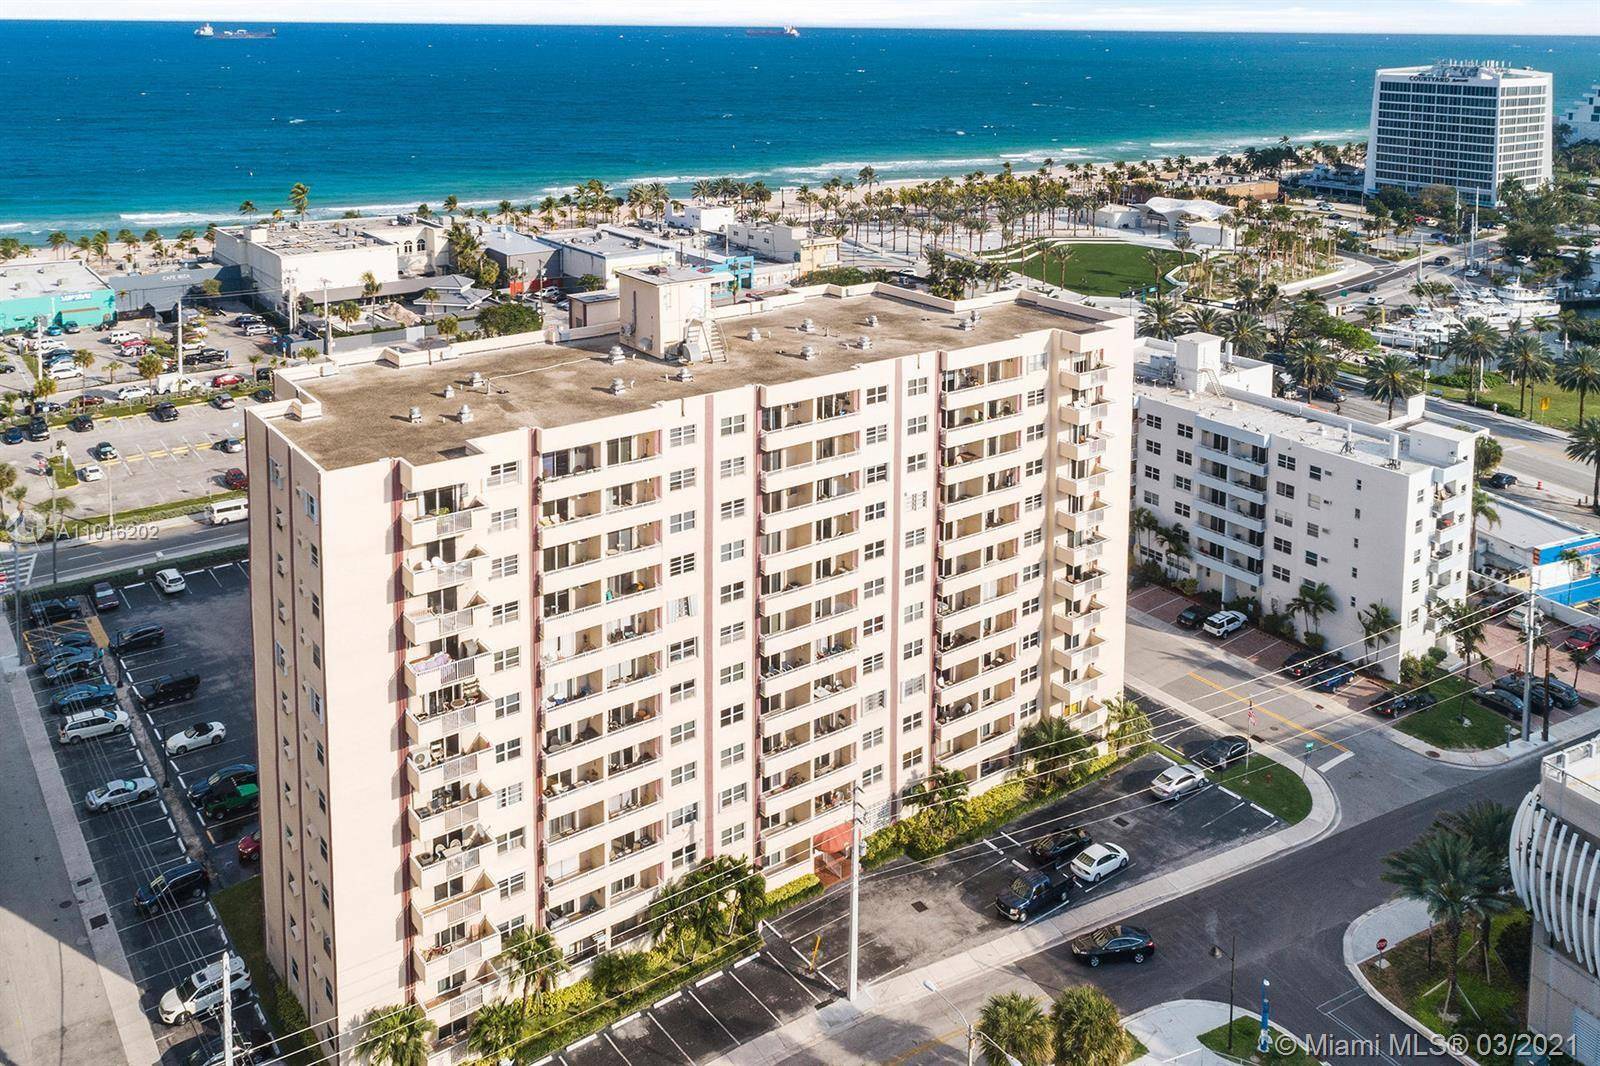 Fully furnished, clean 1 bedroom 1 bath condo in secured access building 2 blocks from the sand in Fort Lauderdale beach.